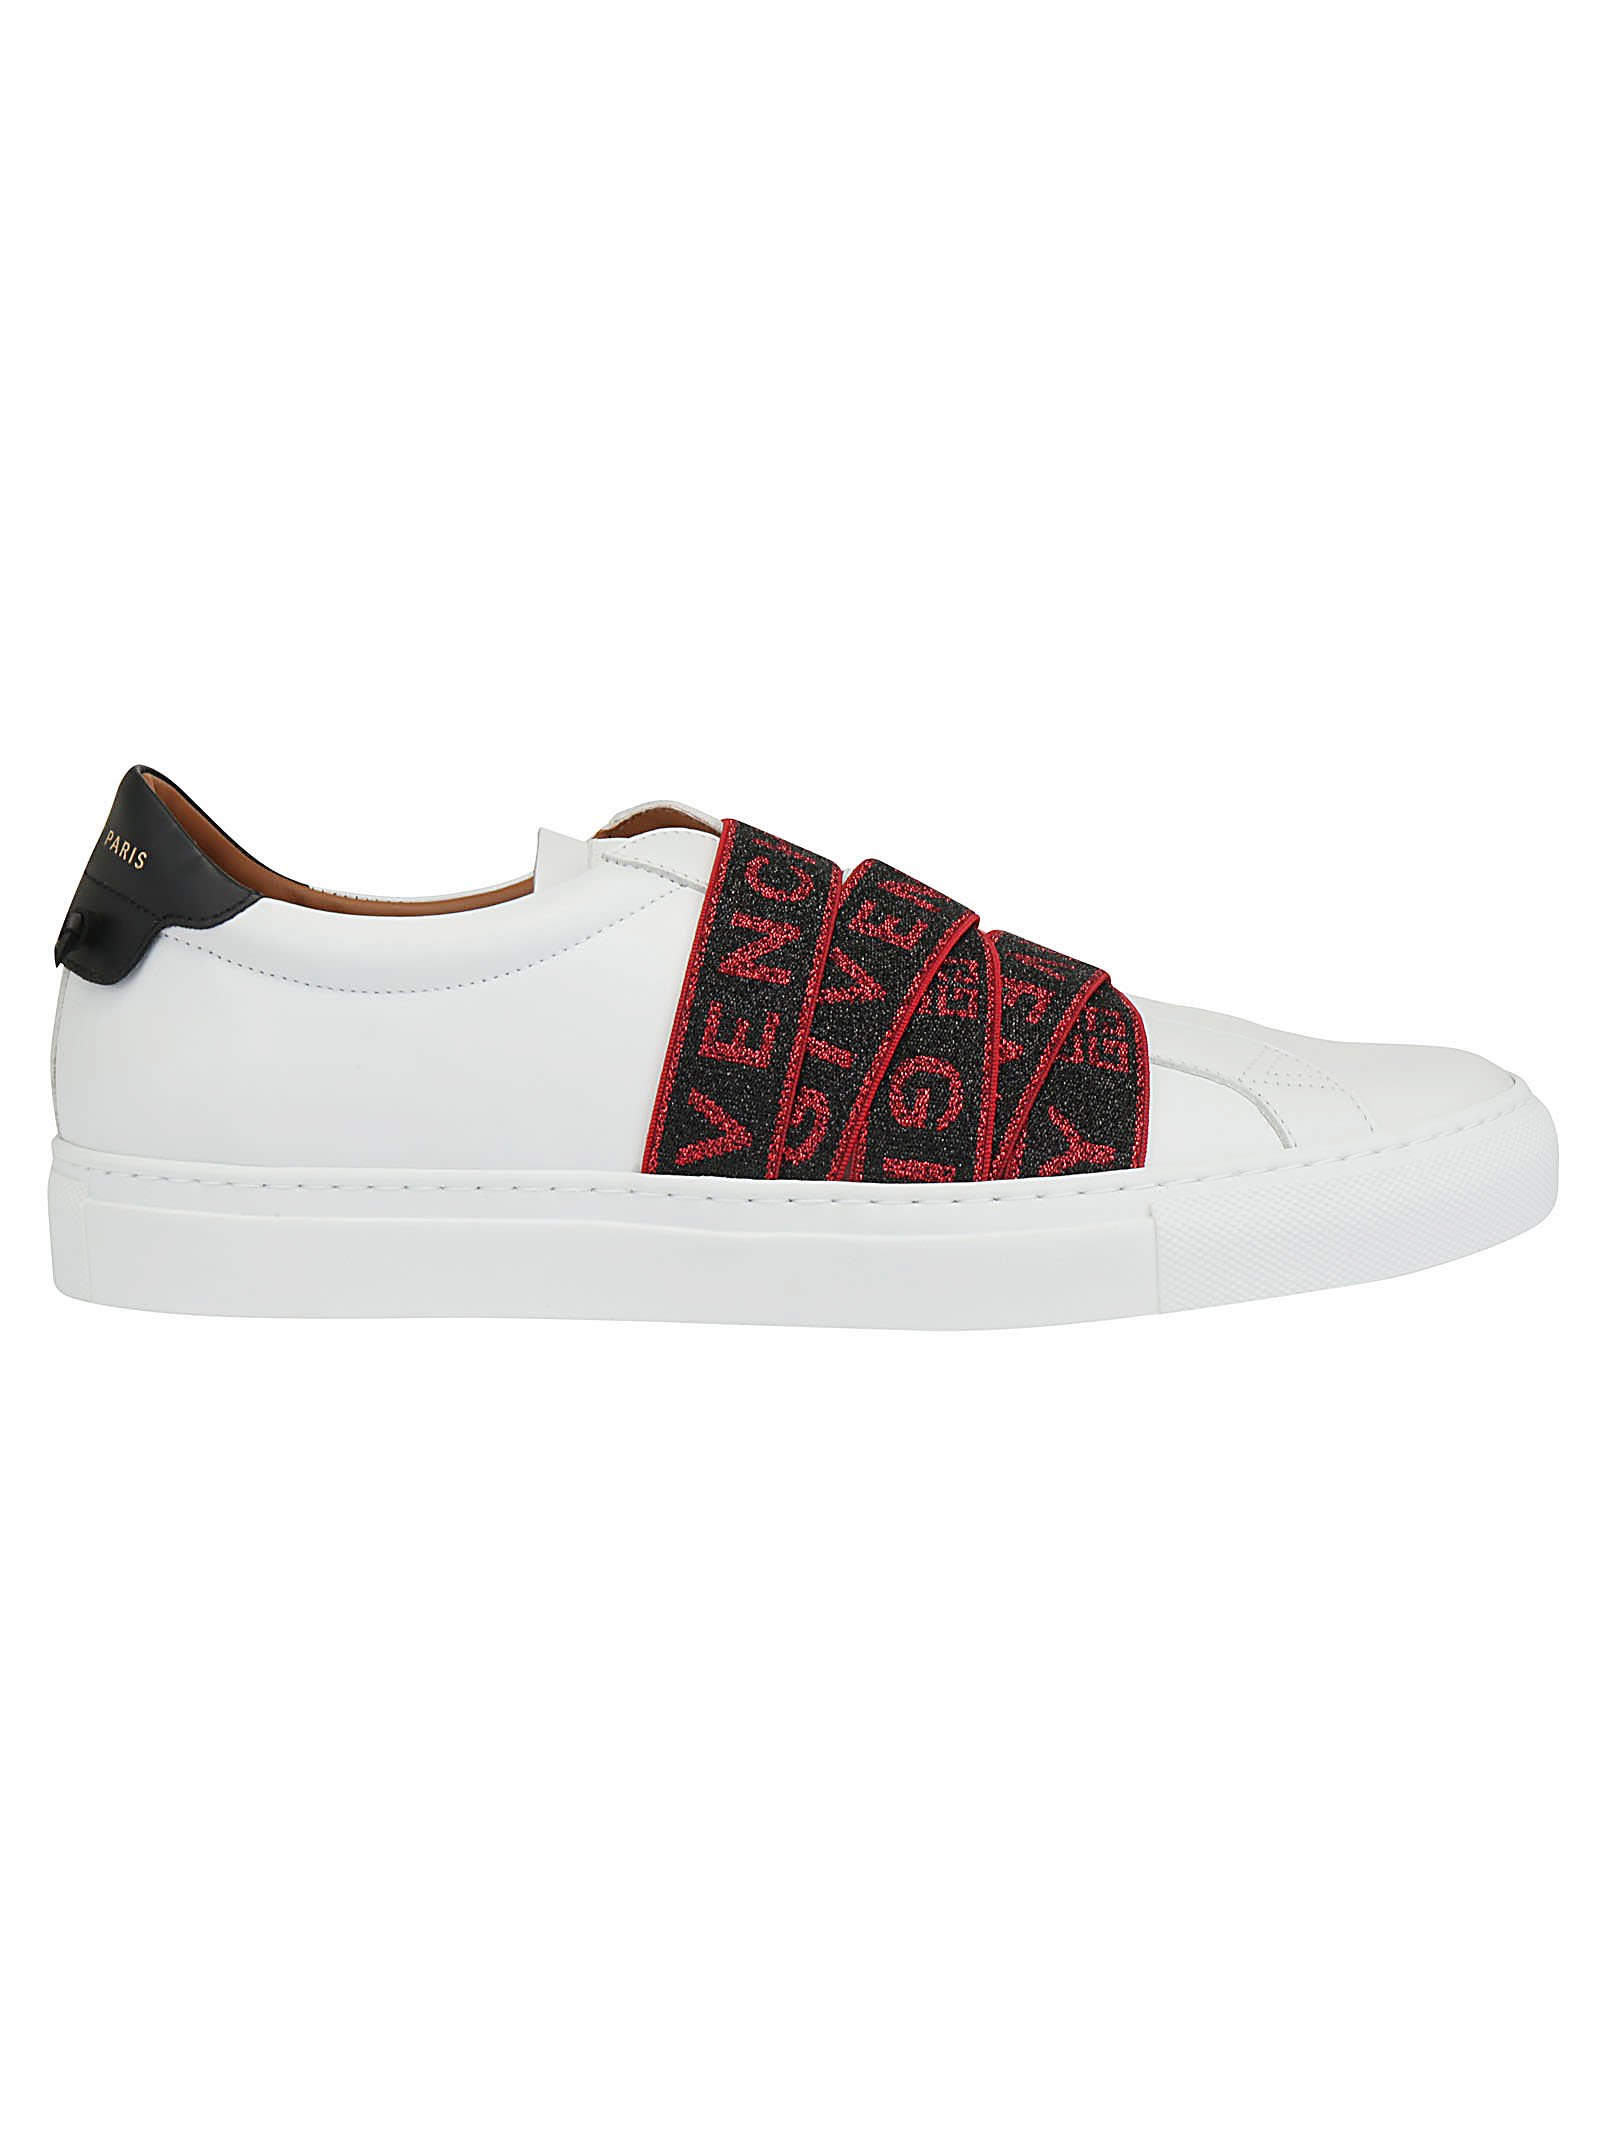 GIVENCHY URBAN STREET trainers,11026932